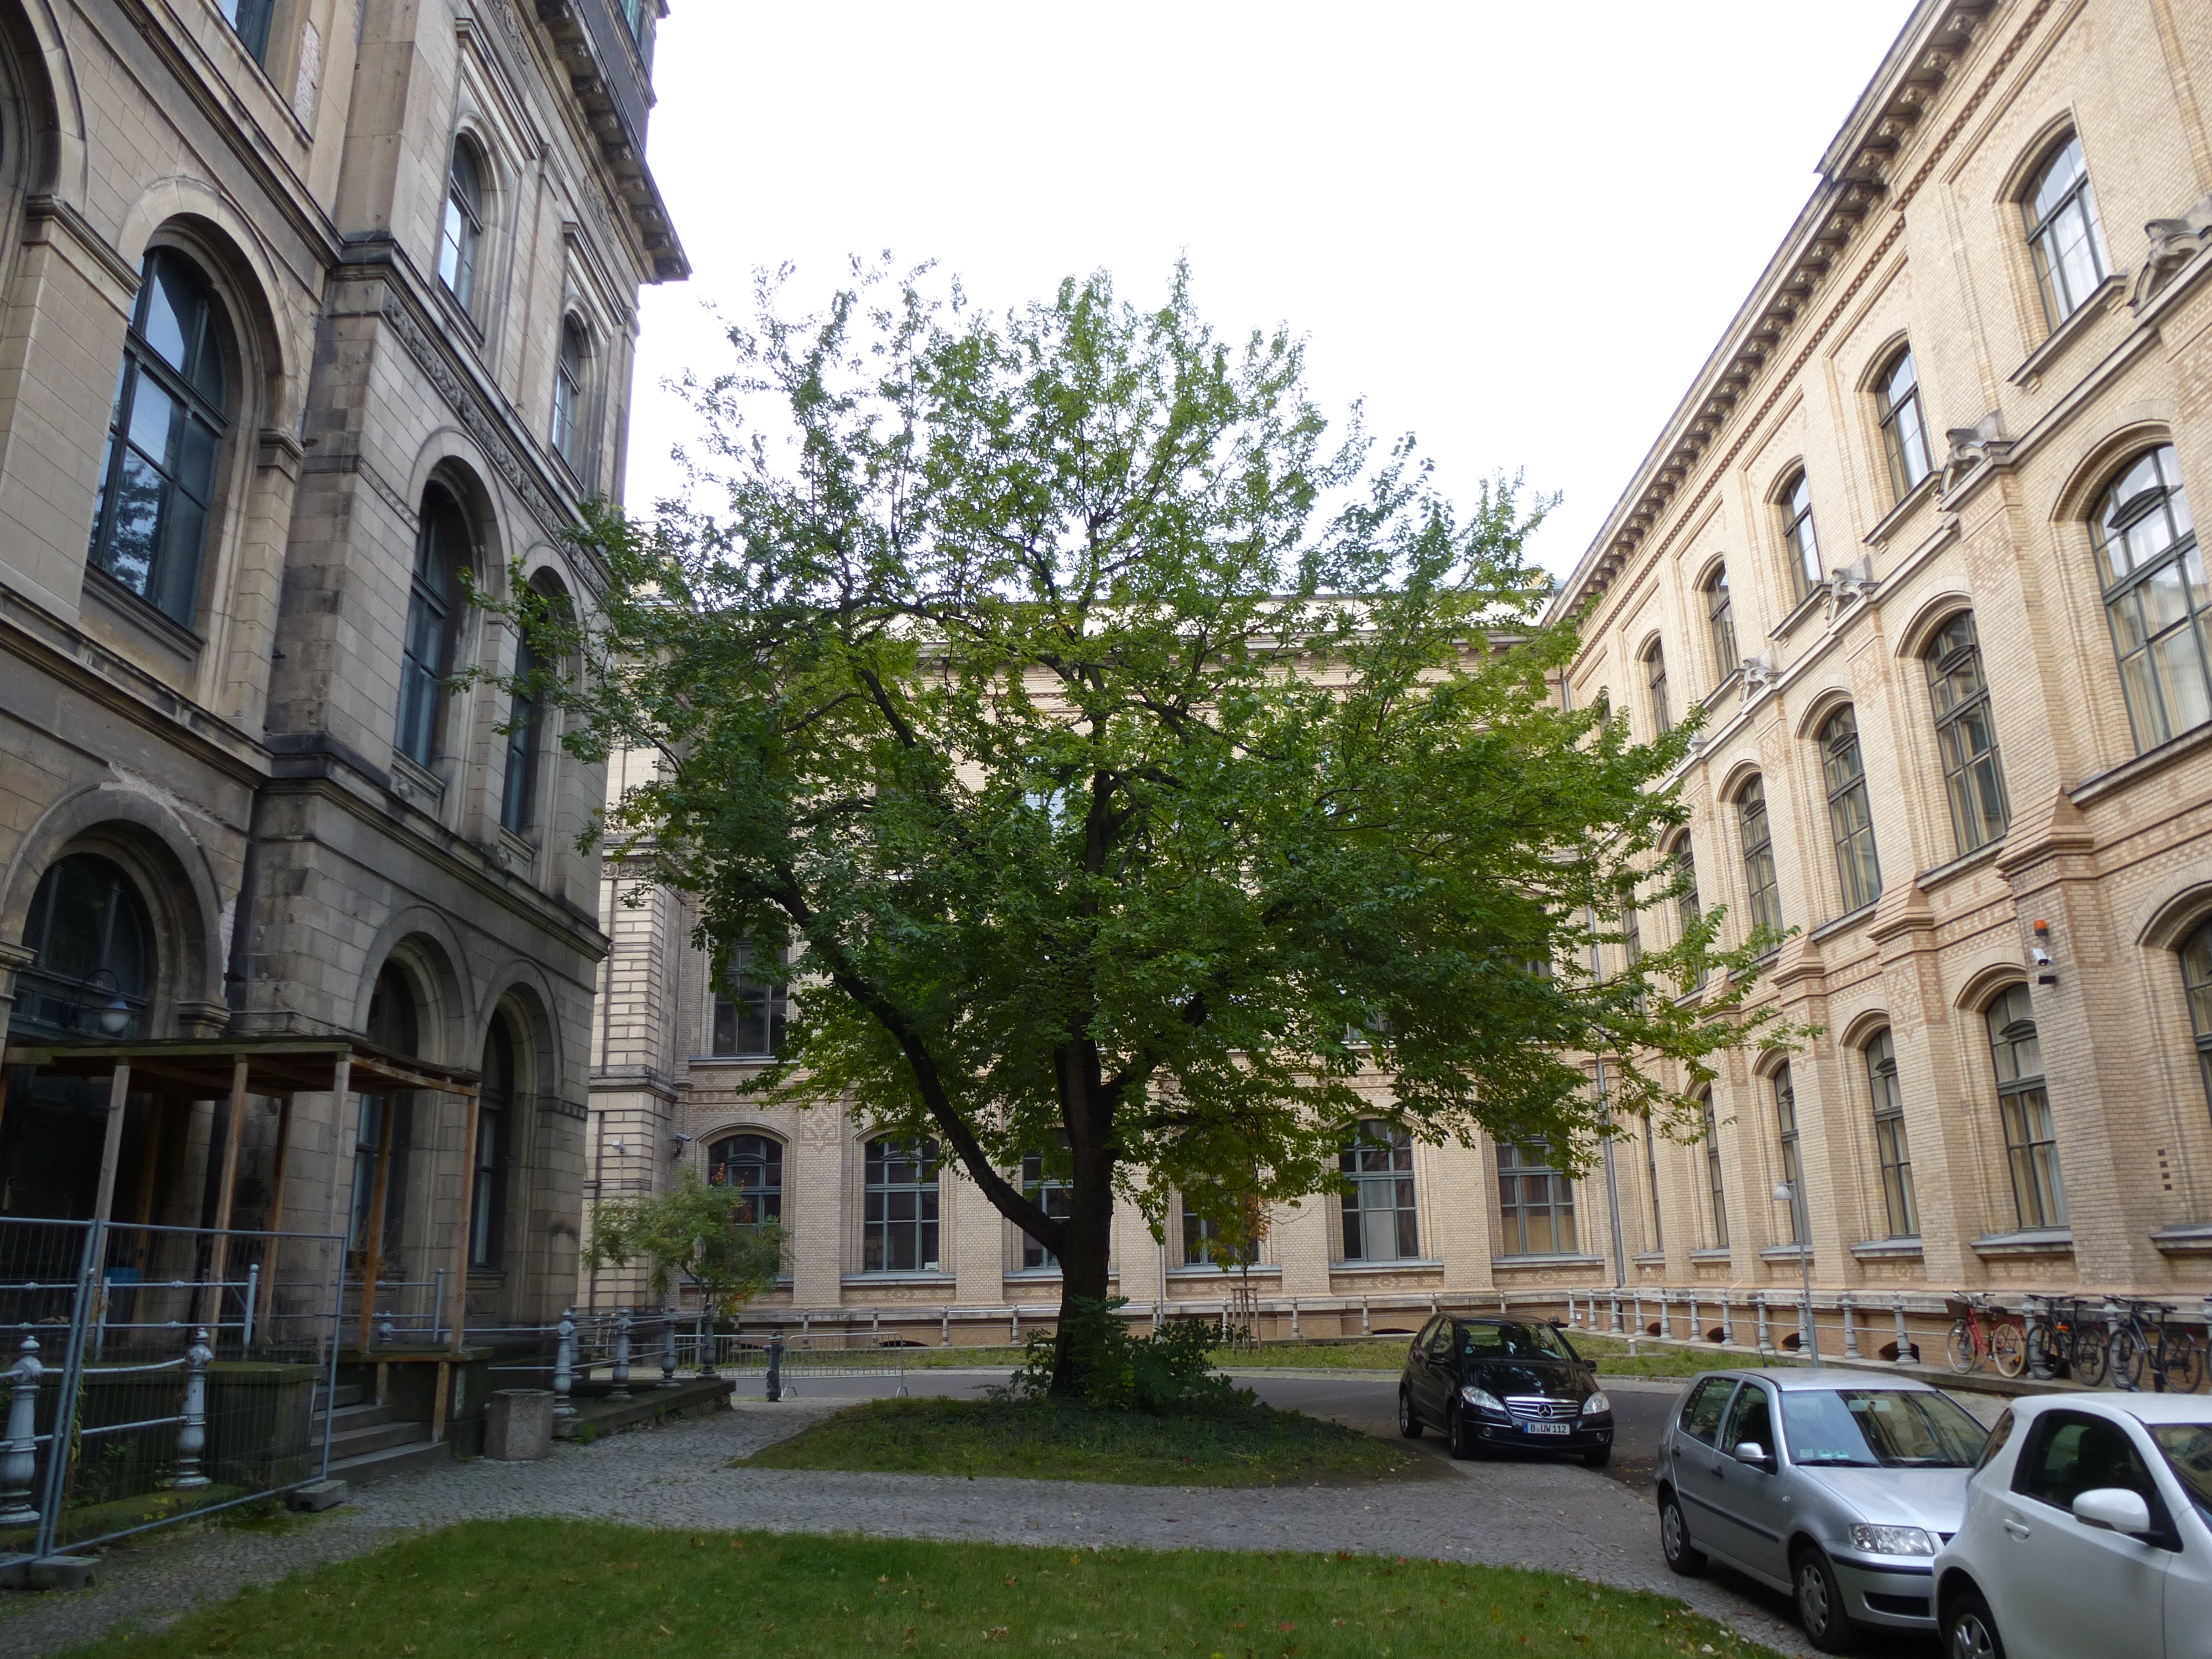 A large deciduous tree with a round canopy stands on a corner between two multistorey buildings with light stone façades and tall windows. The tree is about two storeys high. Two cars are parked beside it.